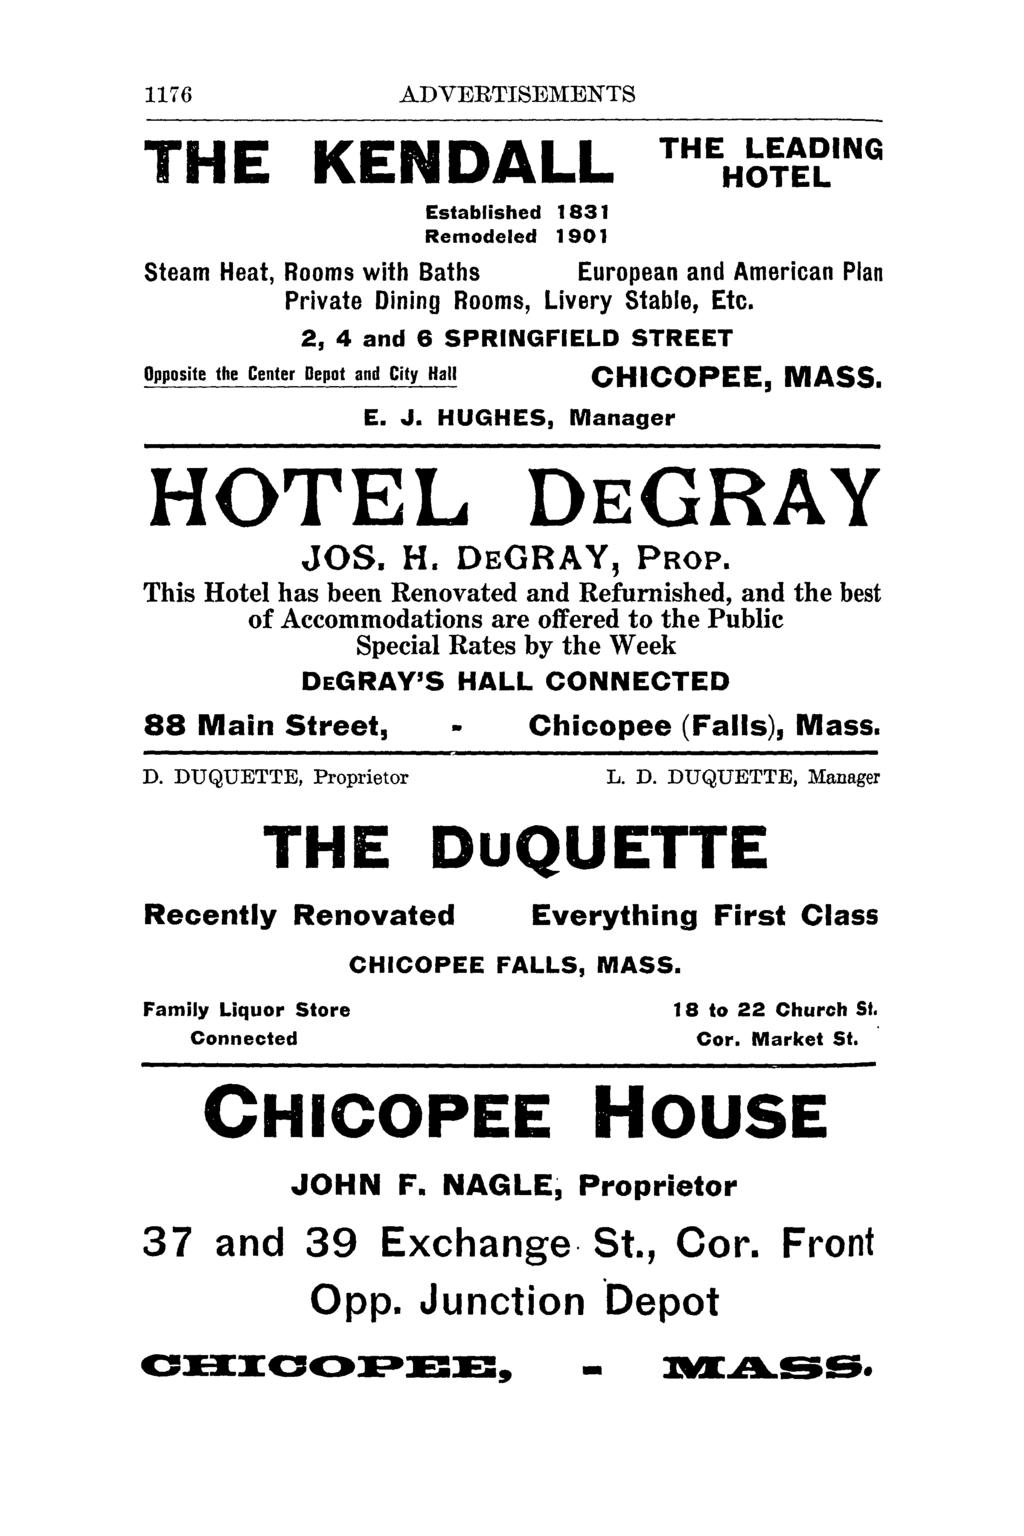 1176 ADVERTISEMENTS THE KENDALL Established 1831 Remodeled 1 901 THE LEADING HOTEL Steam Heat, Rooms with Baths European and American Plan Private Dining Rooms, Livery Stable, Etc.